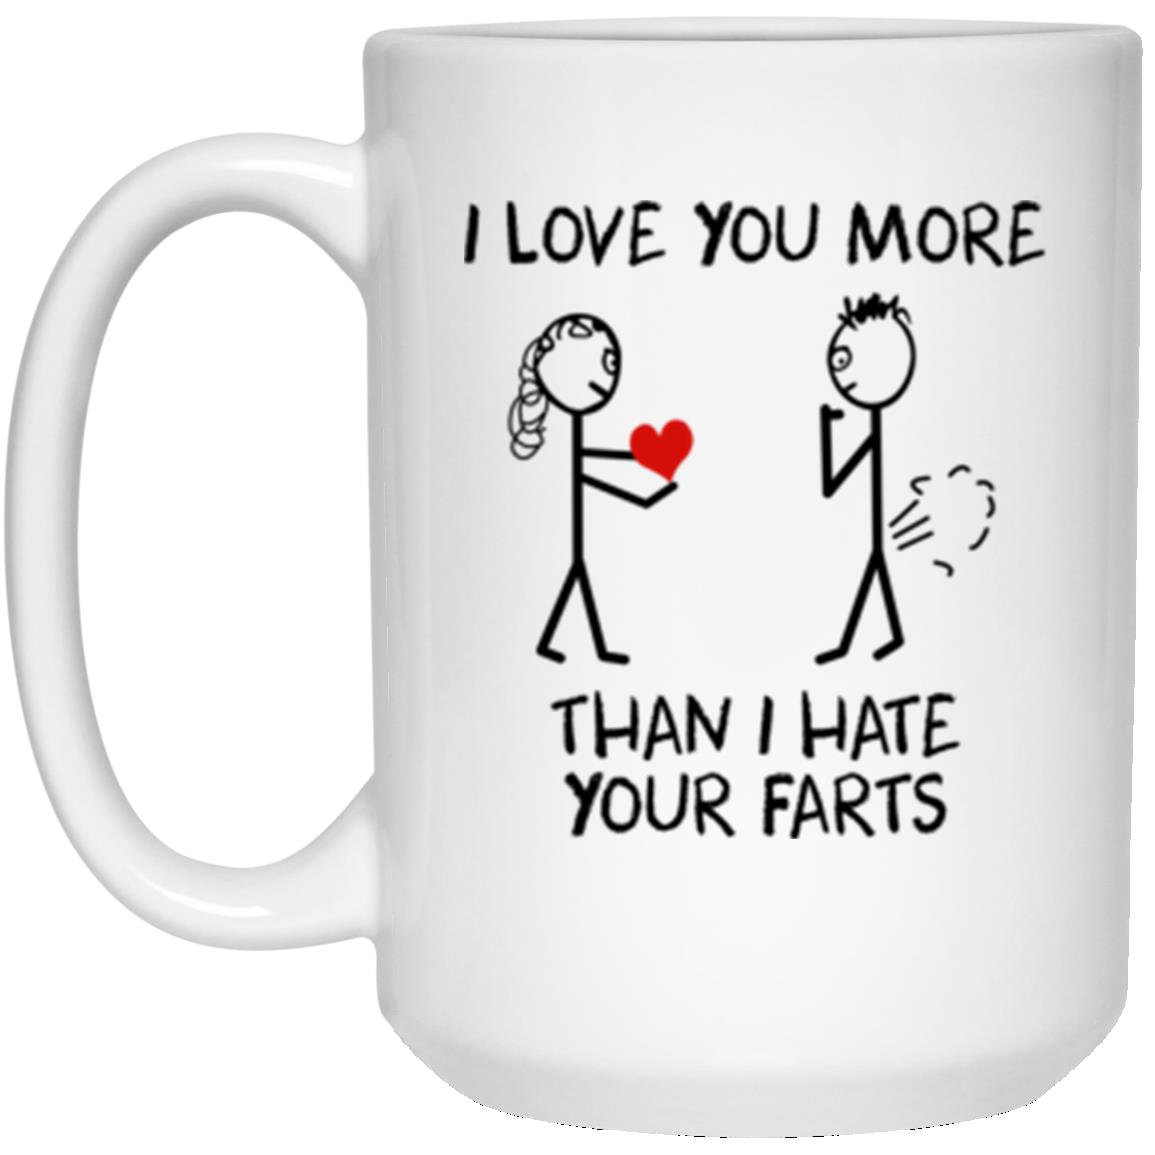 I Love You More Than I Hate Your Farts Mugs Allbluetees Online T Shirt Store Perfect For Your Day To Day